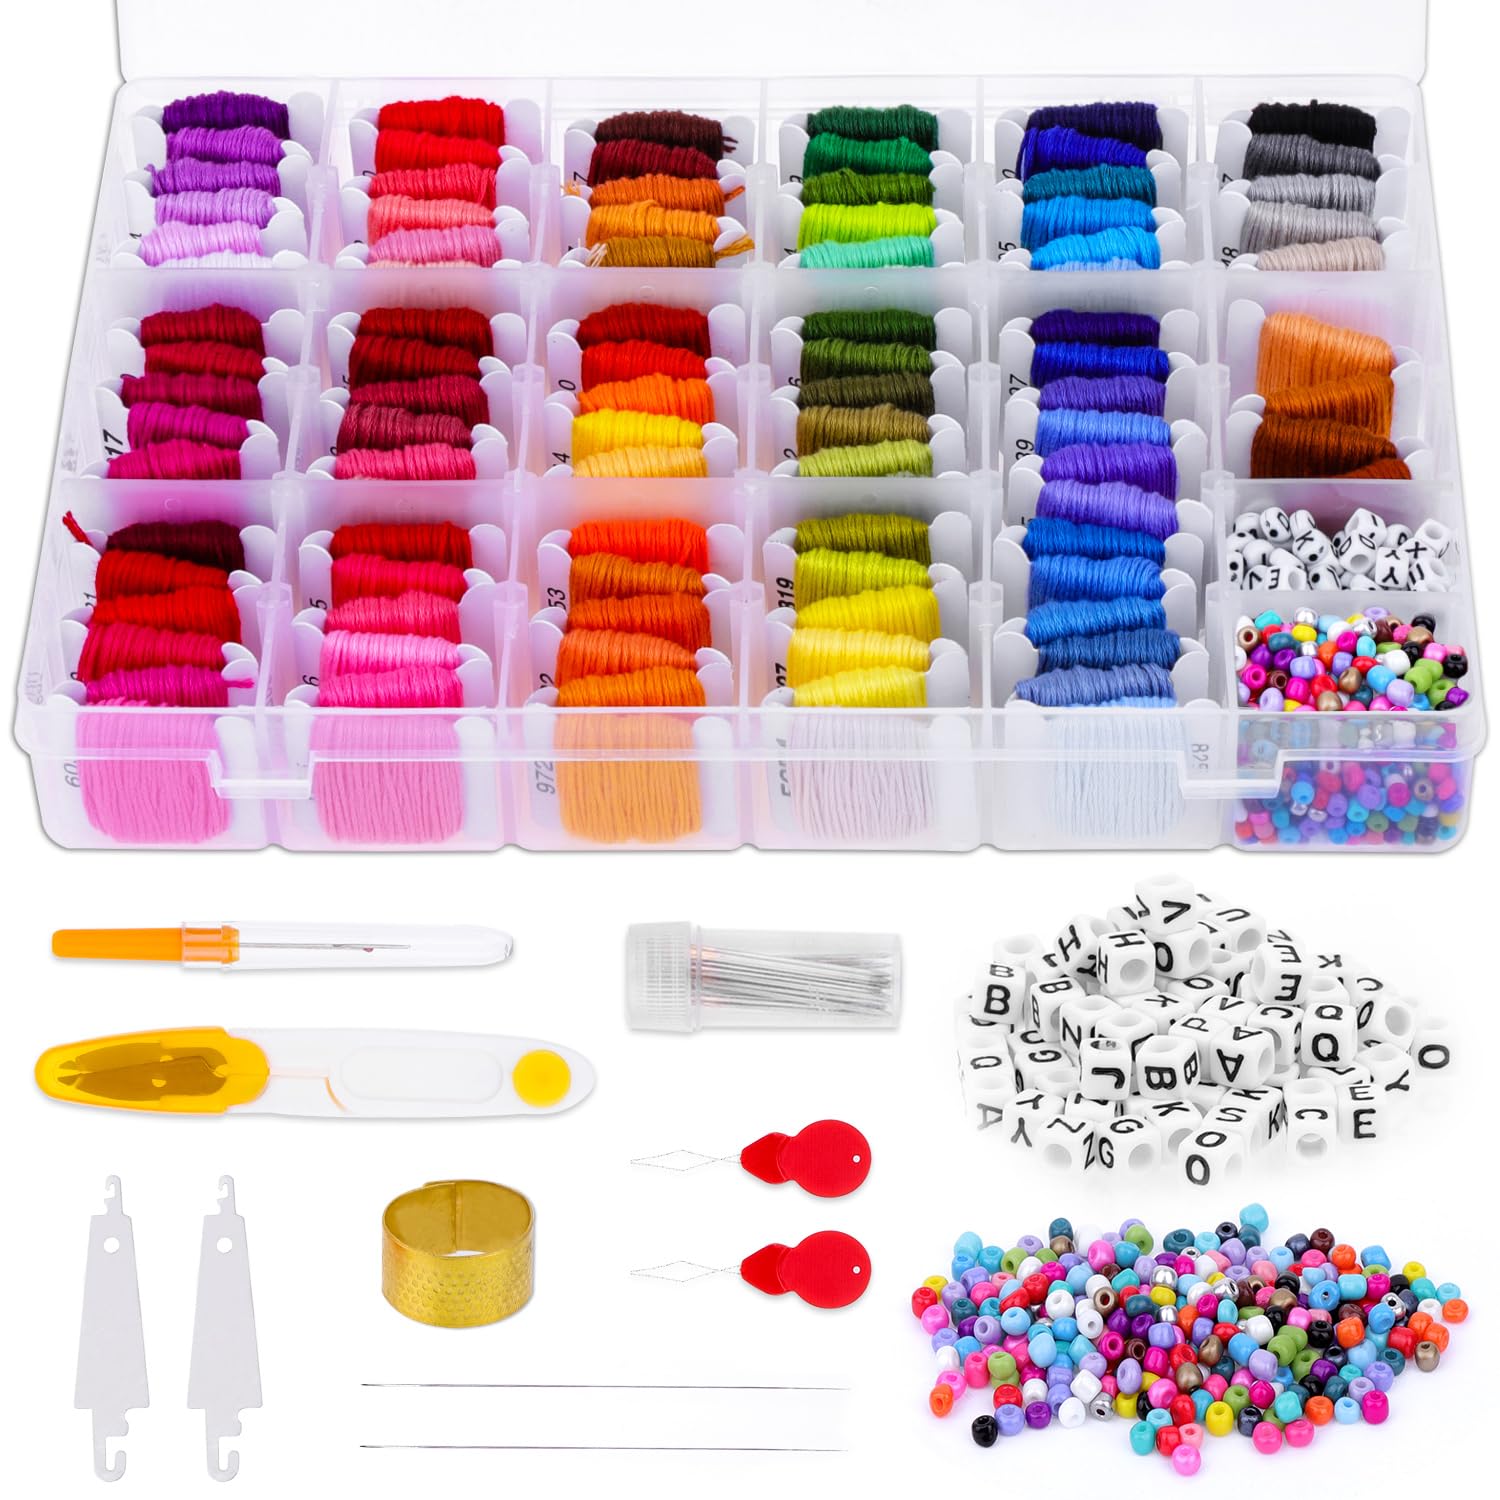 Embroidery Floss Organizer Kit 100 Colors Flosses with 40 Pcs Cross Stitch  Tools